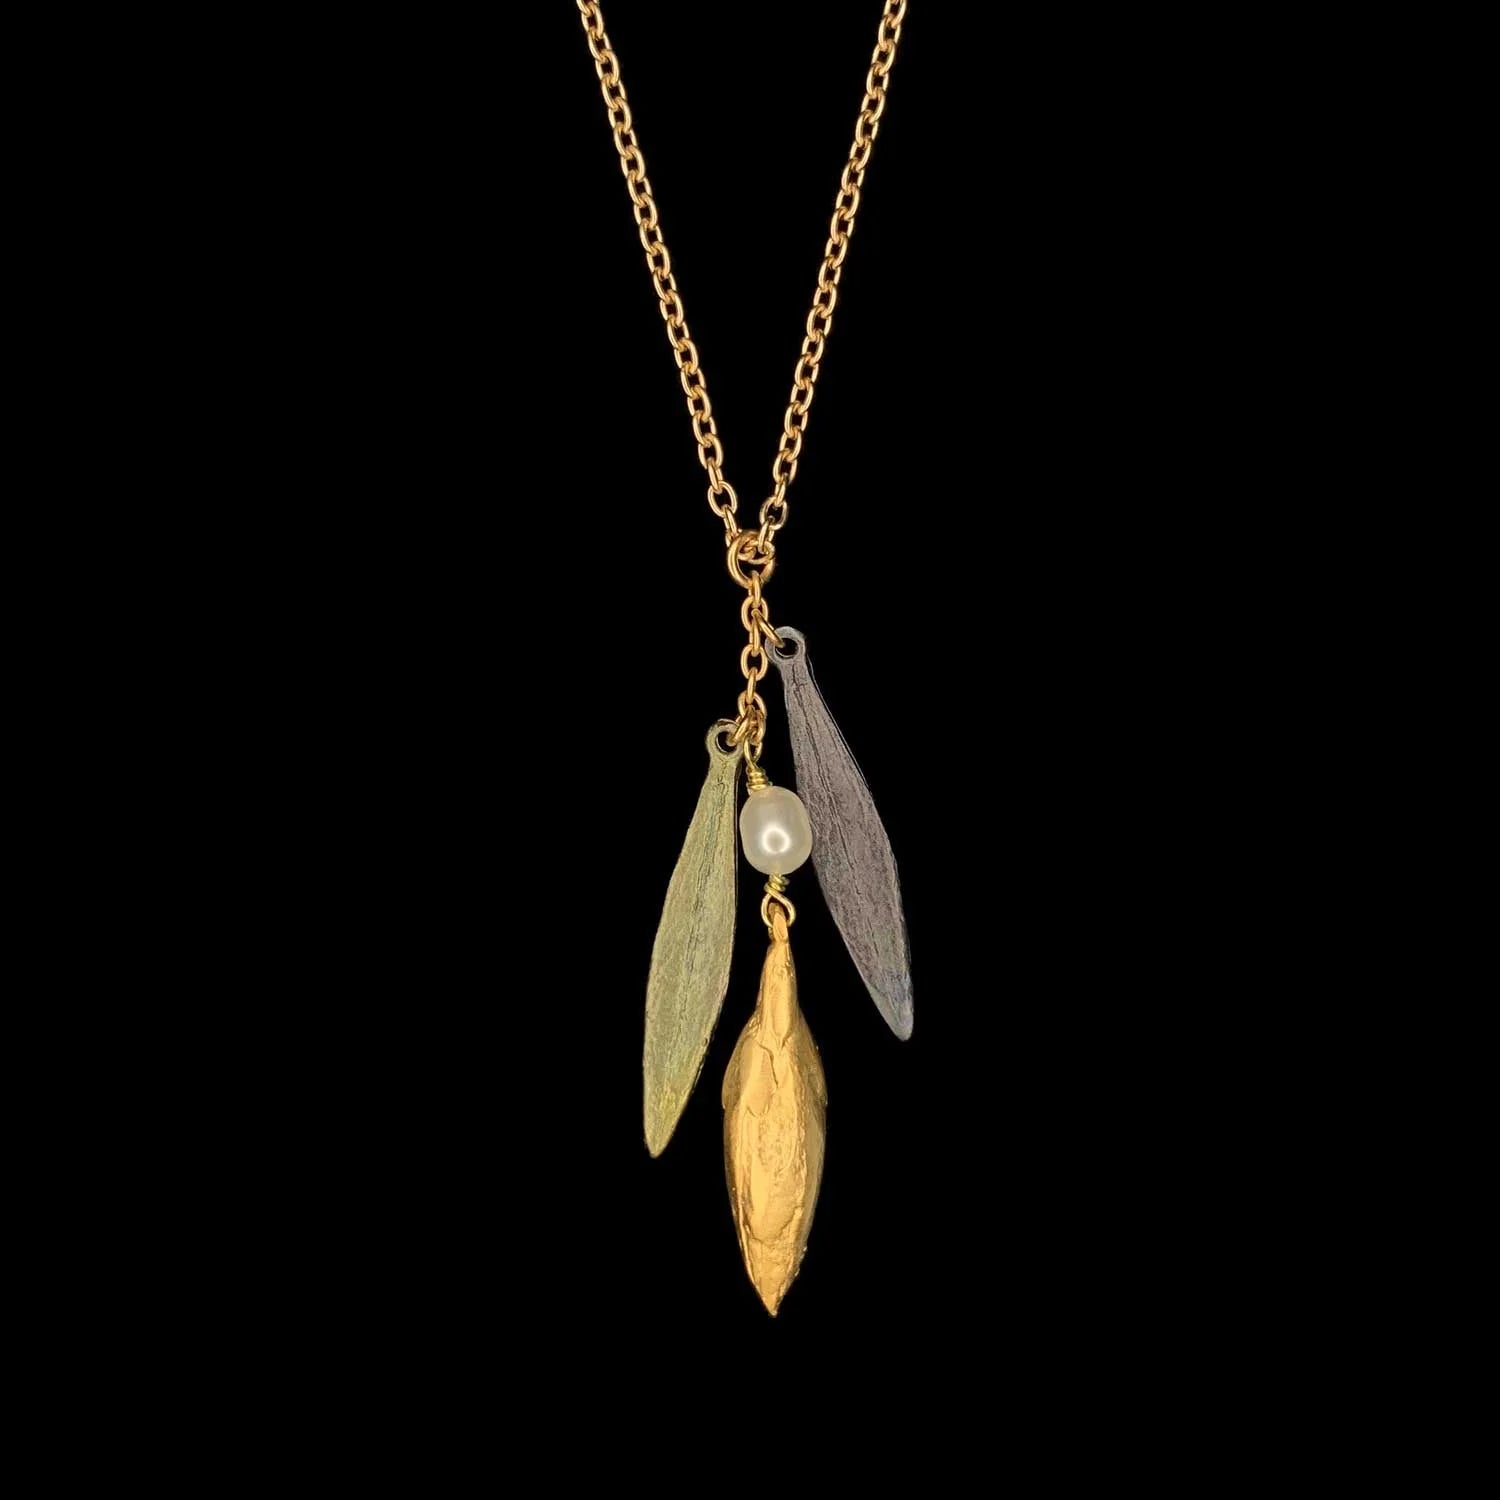 Leaf and Bud Dainty Pendant Necklace